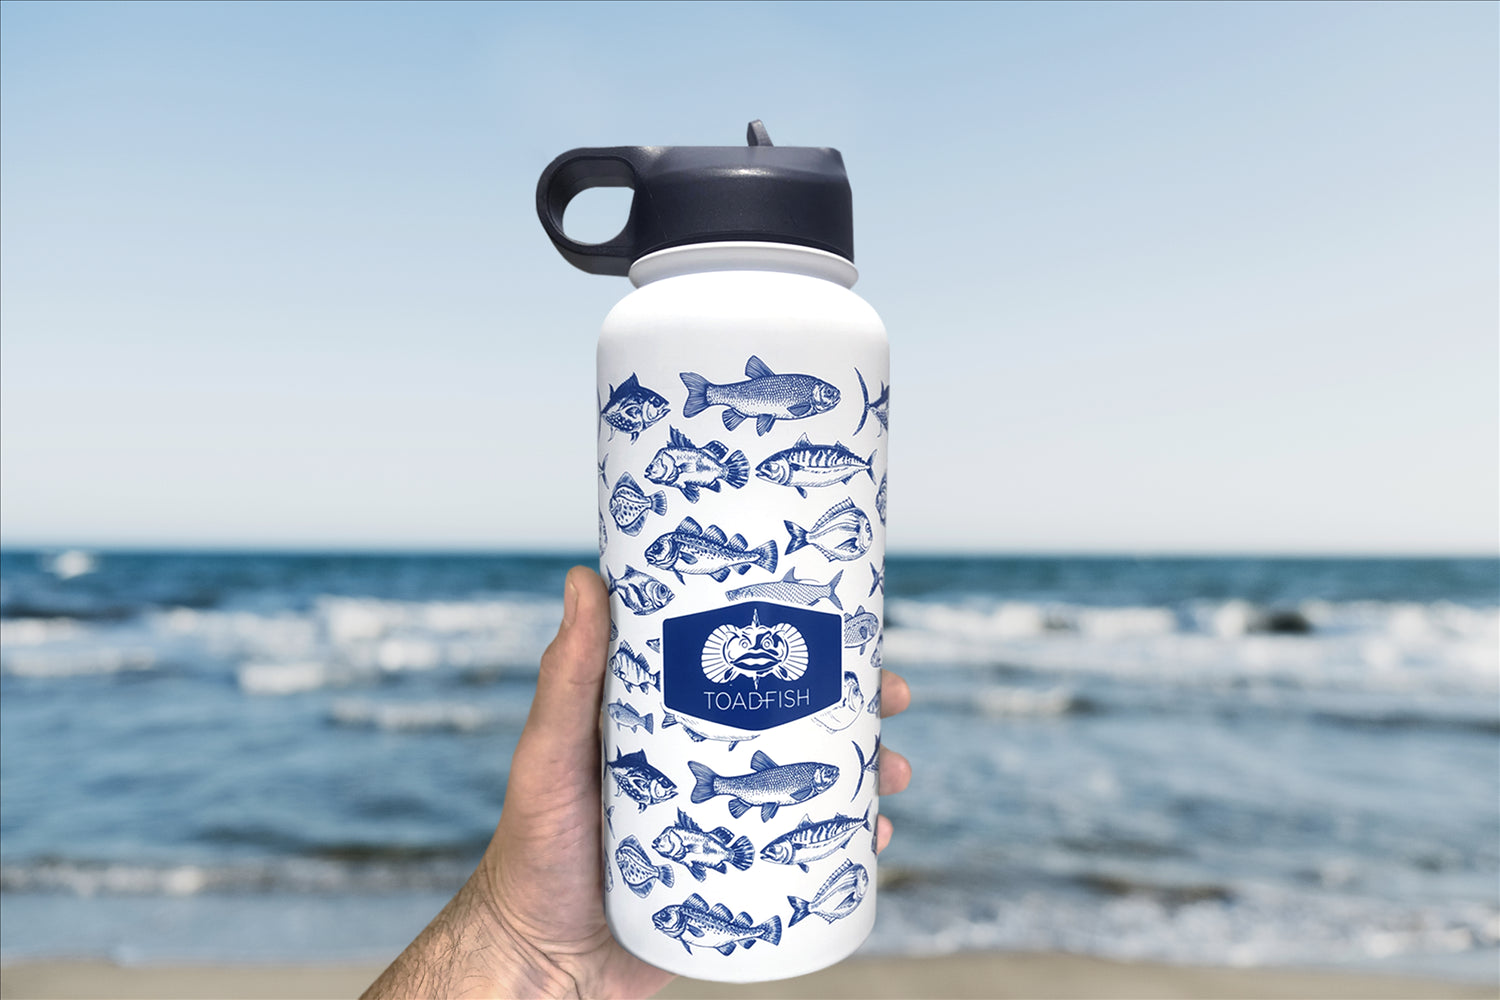 TOADFISH Toadfish 32oz Insulated Stainless Steel Eco-Canteen Water Bottle